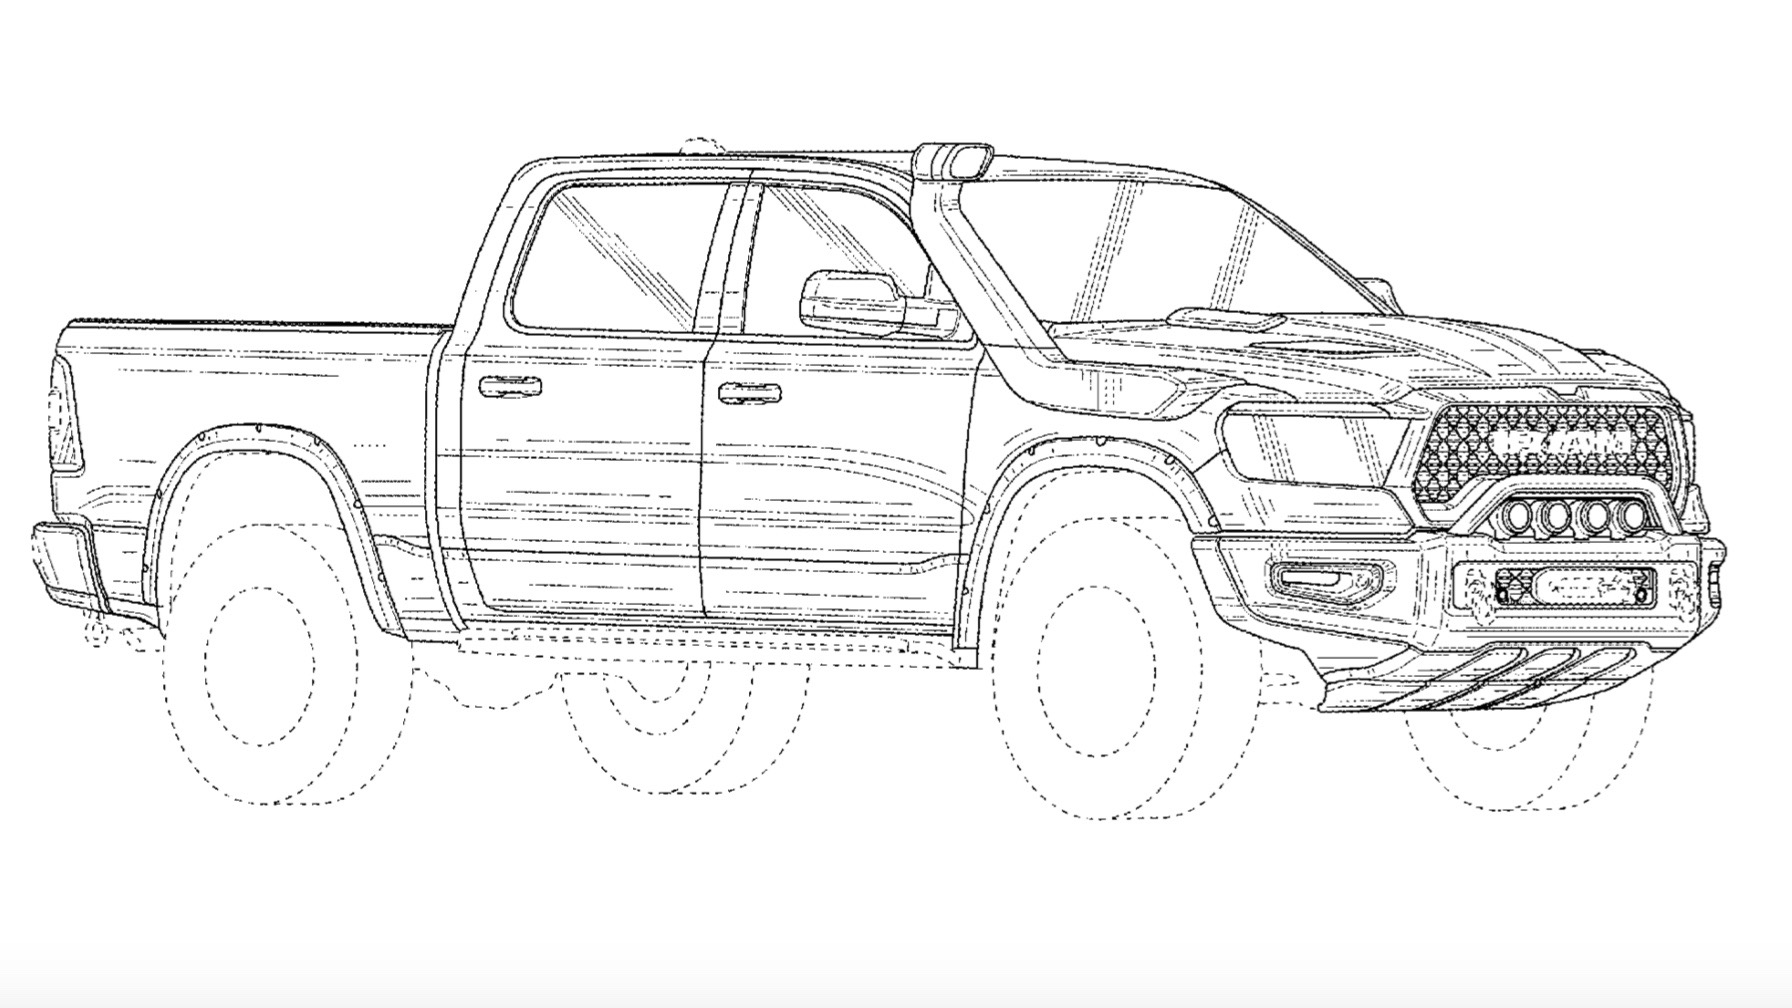 Ram 1500 Rebel OTG concept gets patented, previews lifted truck with snorkel and winch